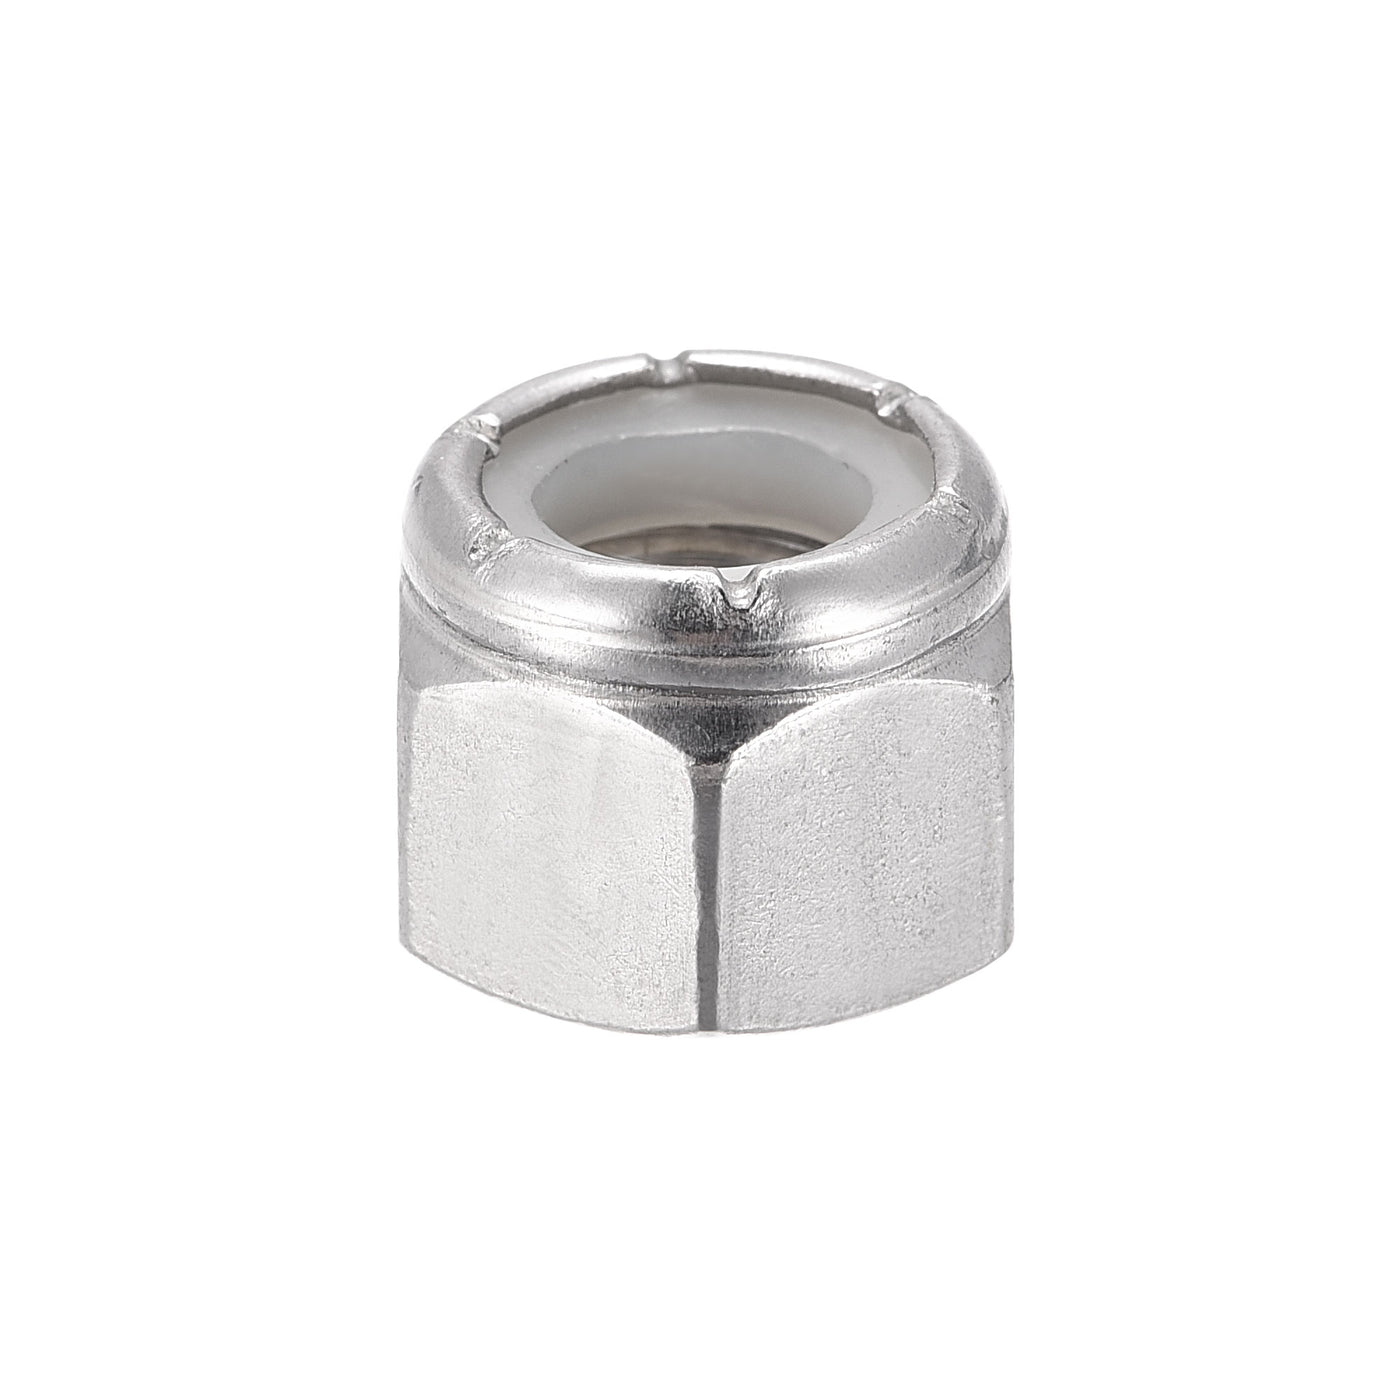 Uxcell Uxcell 3/8-16 UNC Nylon Insert Hex Lock Nuts, 304 Stainless Steel, Plain Finish, 25pcs